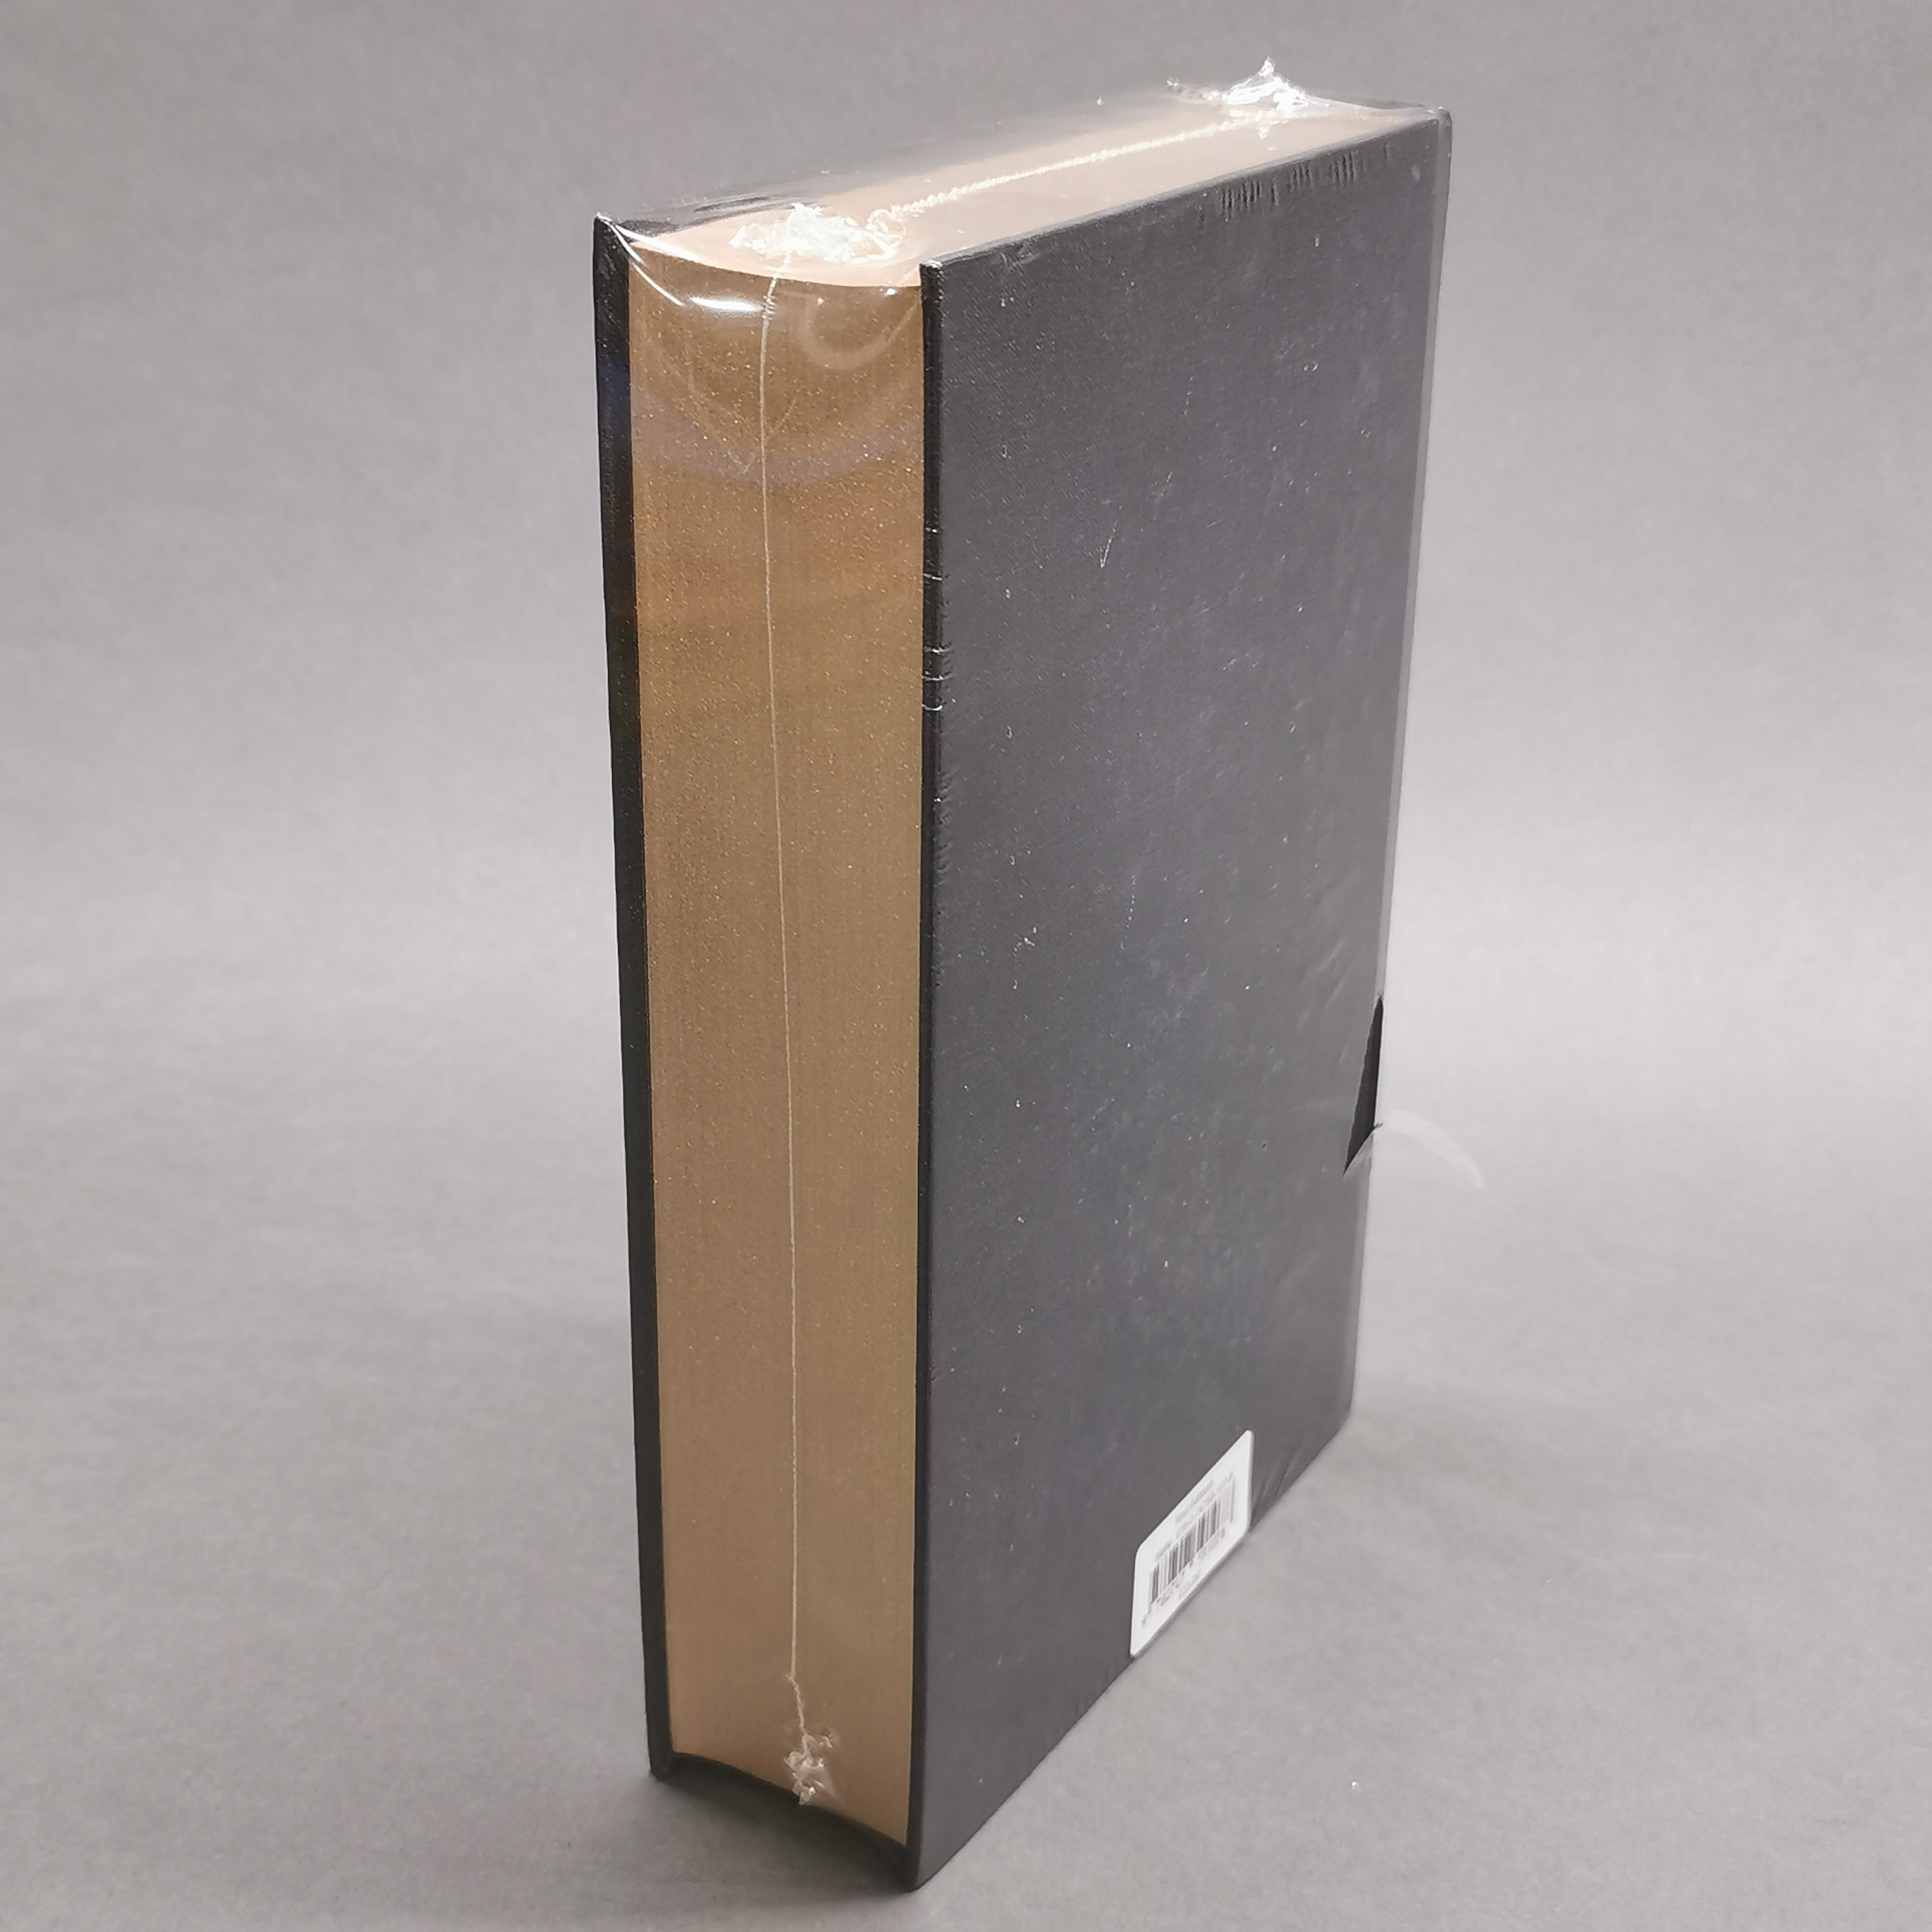 A first edition sealed hardback Harry Potter and the Deathly Hallows novel. - Image 2 of 3